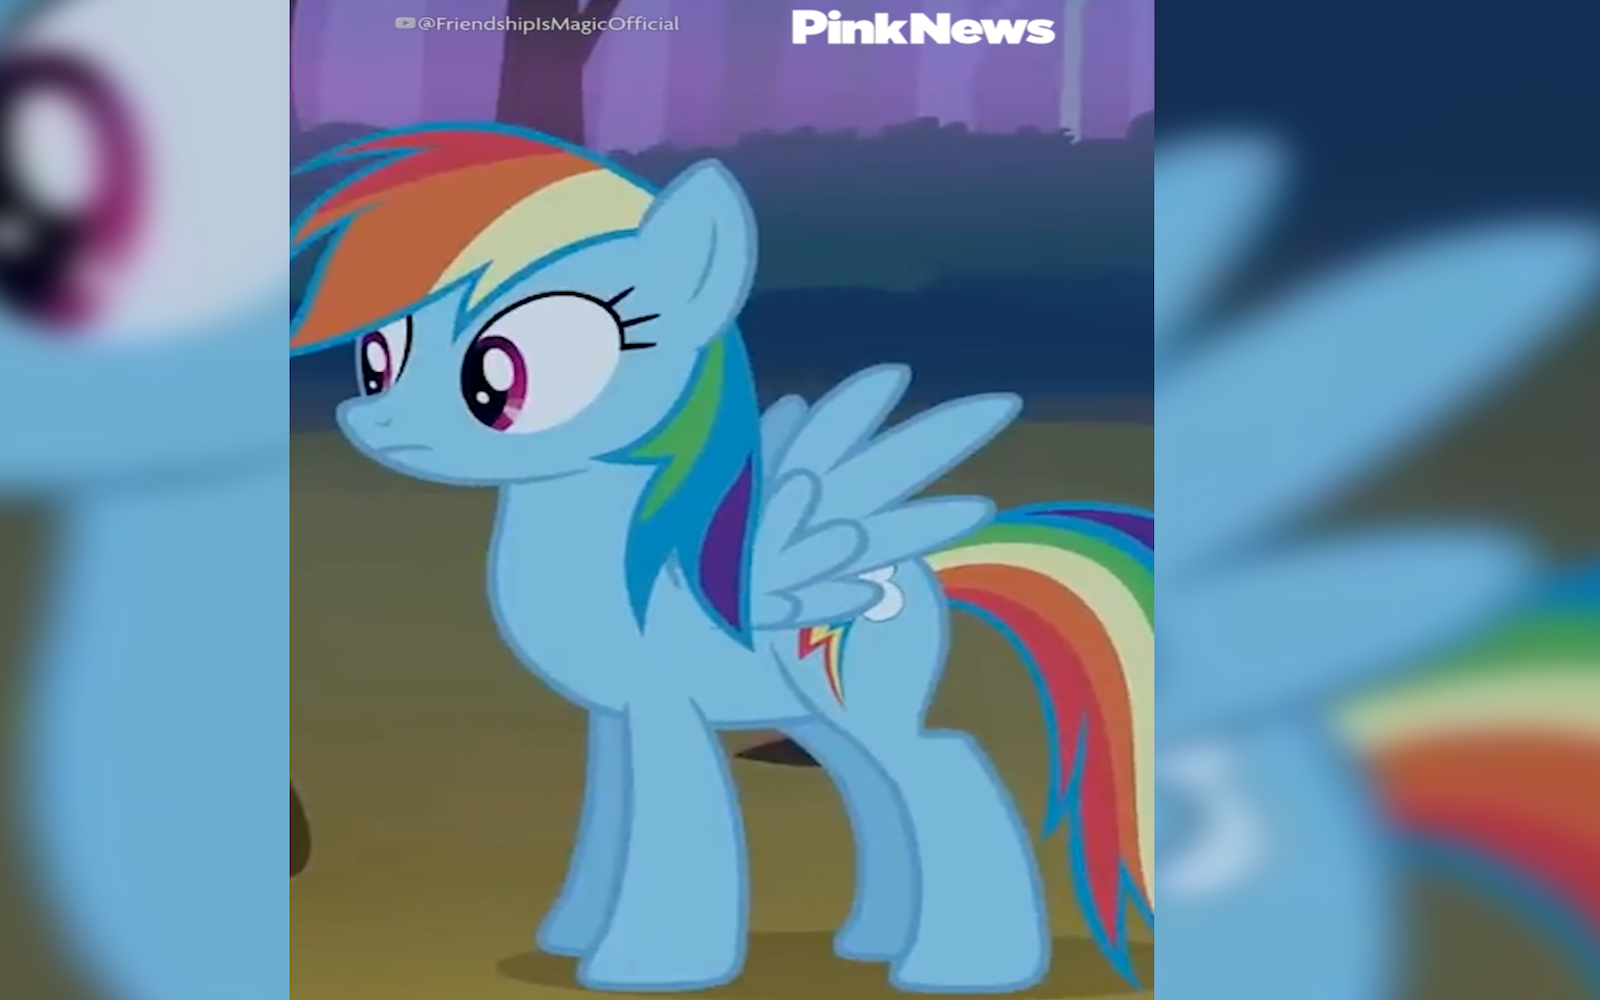 Watch My Little Pony: Friendship Is Magic Streaming Online